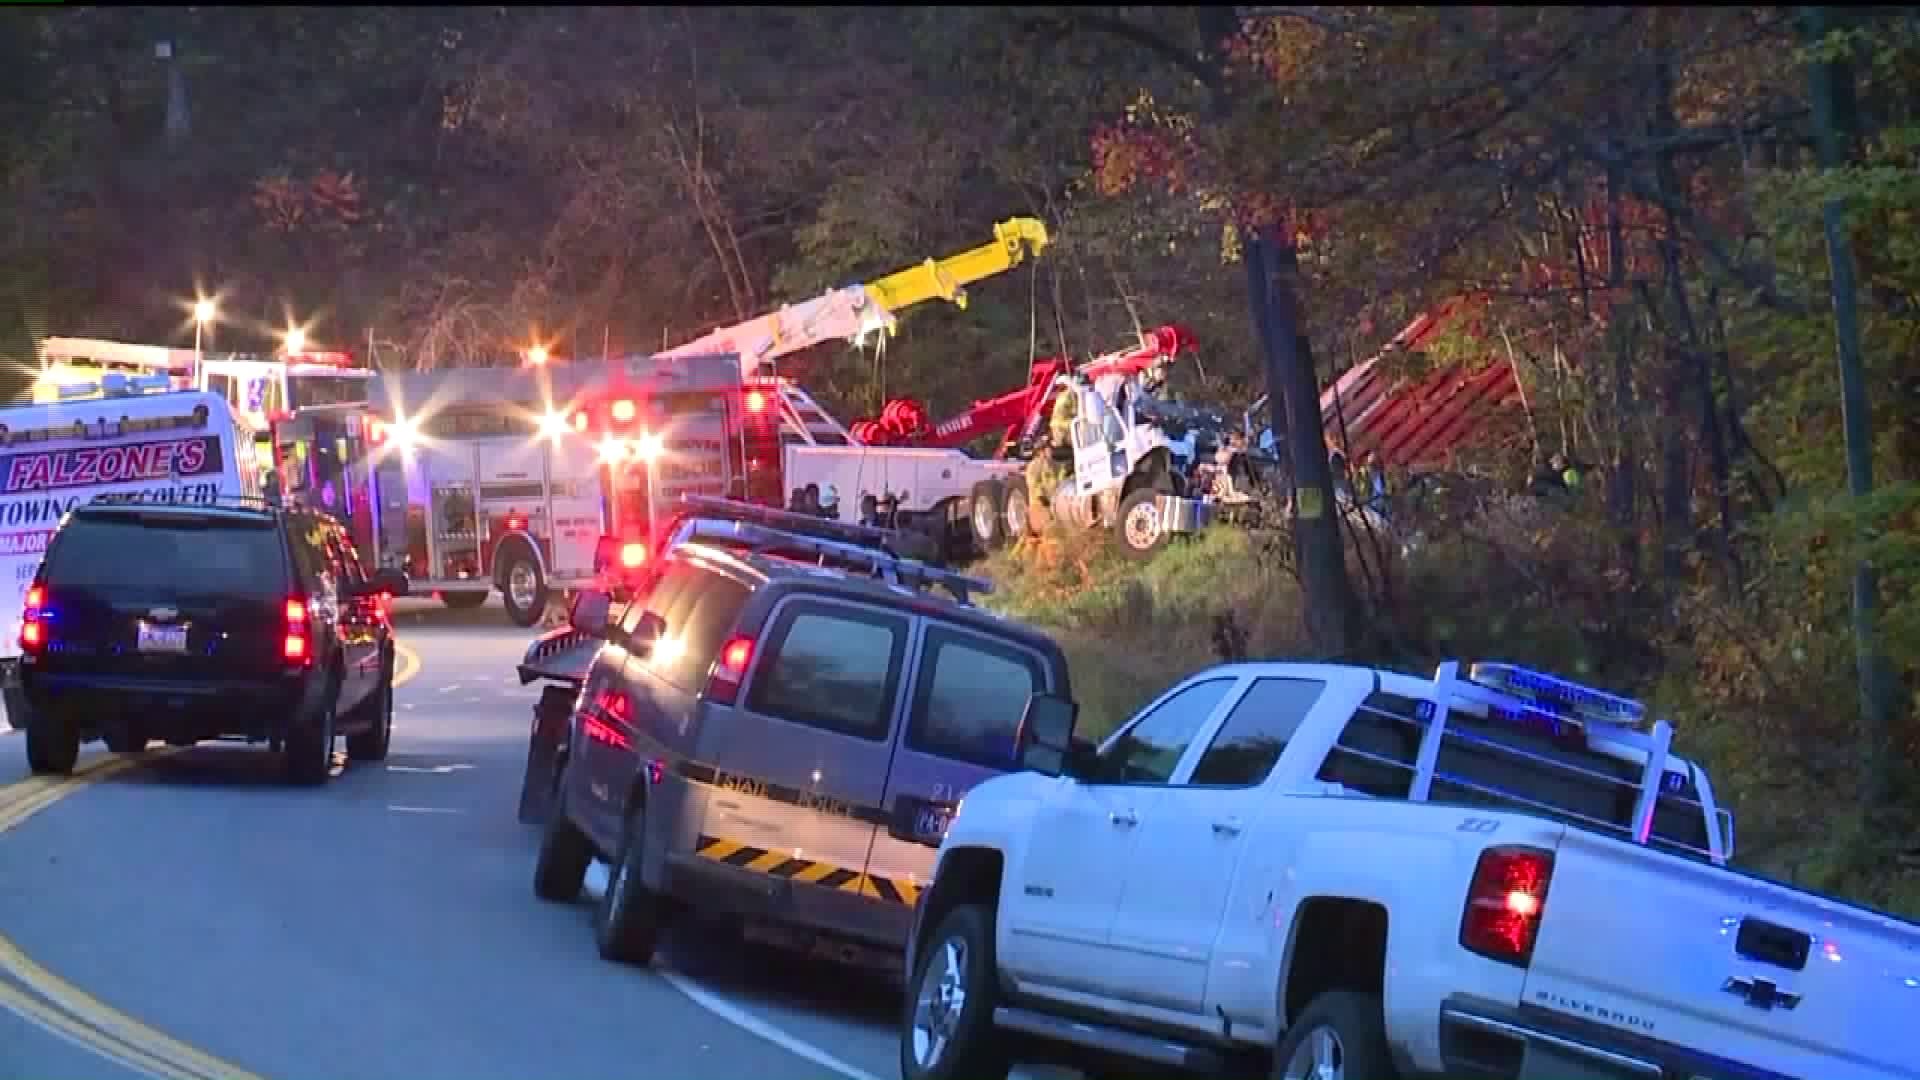 Deadly Crash on Giants Despair in Luzerne County